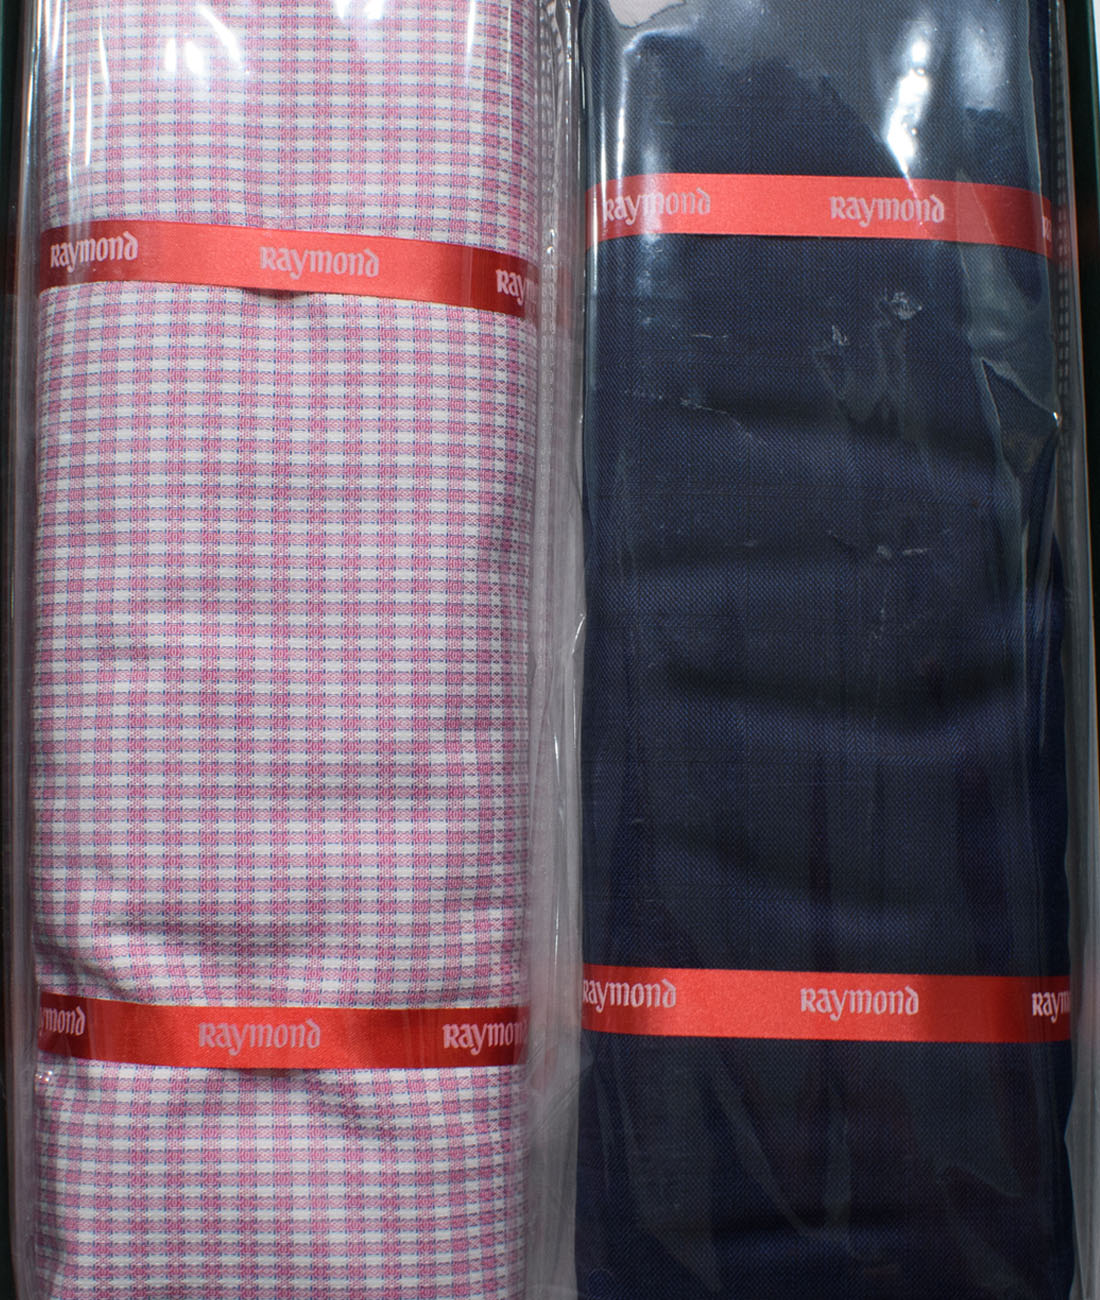 Raymond Plain / Solid Shirt And Trouser Cut Piece Combo Pack, LSS-2-Plain8  | Udaan - B2B Buying for Retailers